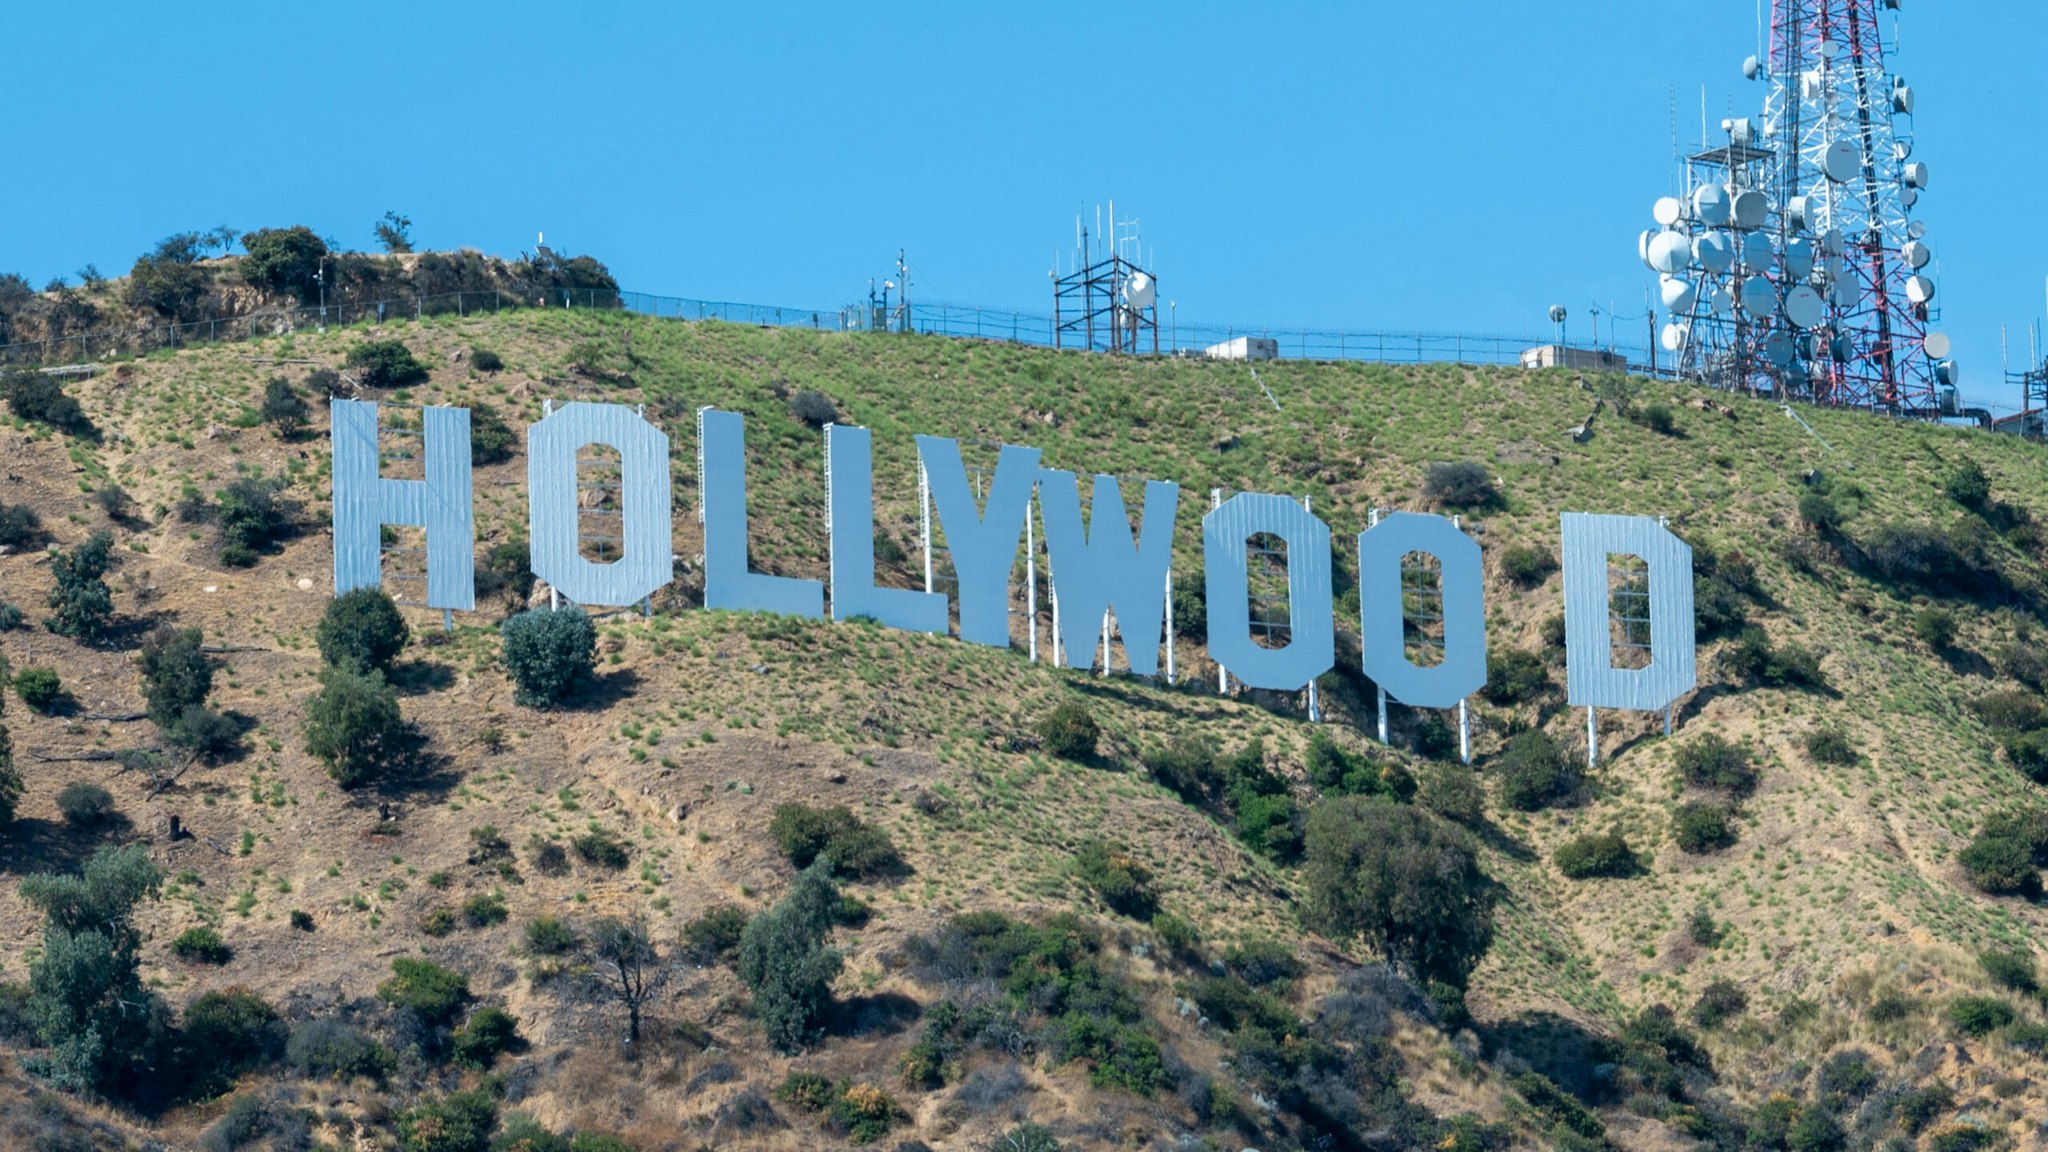 LOS ANGELES, CA - JULY 11: The Hollywood Sign is seen on July 11, 2020 in Los Angeles, California. (Photo by RB/Bauer-Griffin/GC Images)LOS ANGELES, CA - JULY 11: The Hollywood Sign is seen on July 11, 2020 in Los Angeles, California. (Photo by RB/Bauer-Griffin/GC Images)